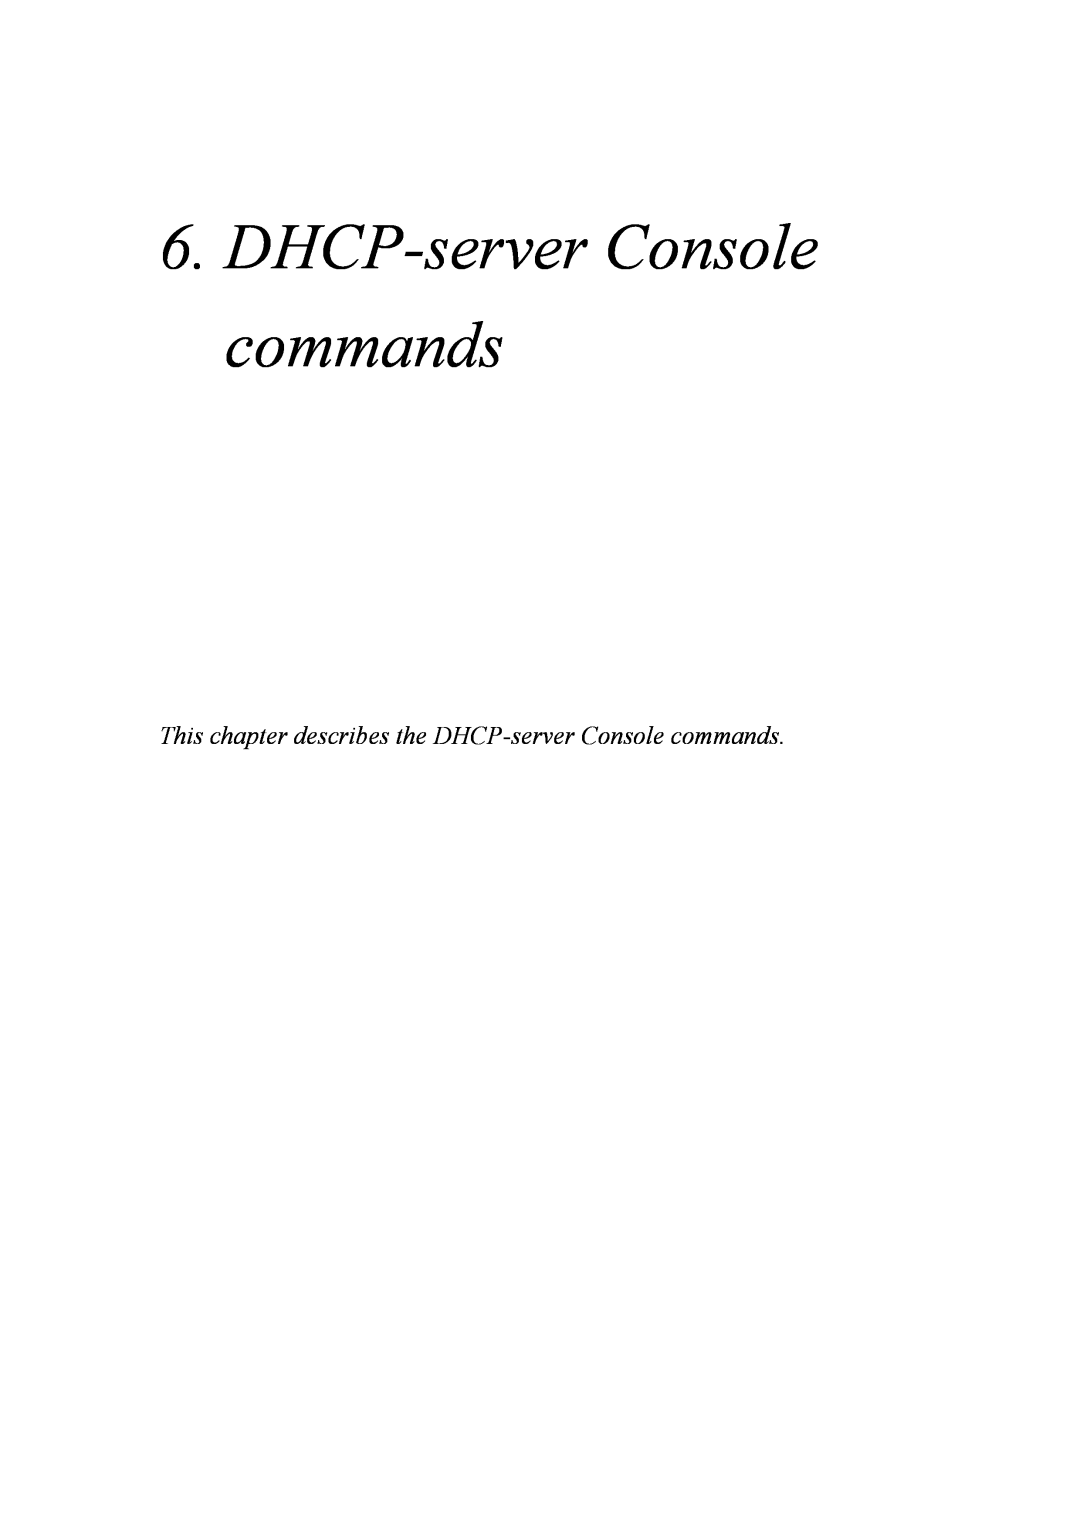 Atlantis Land A02-RA(Atmos)_ME01 manual This chapter describes the DHCP-server Console commands 